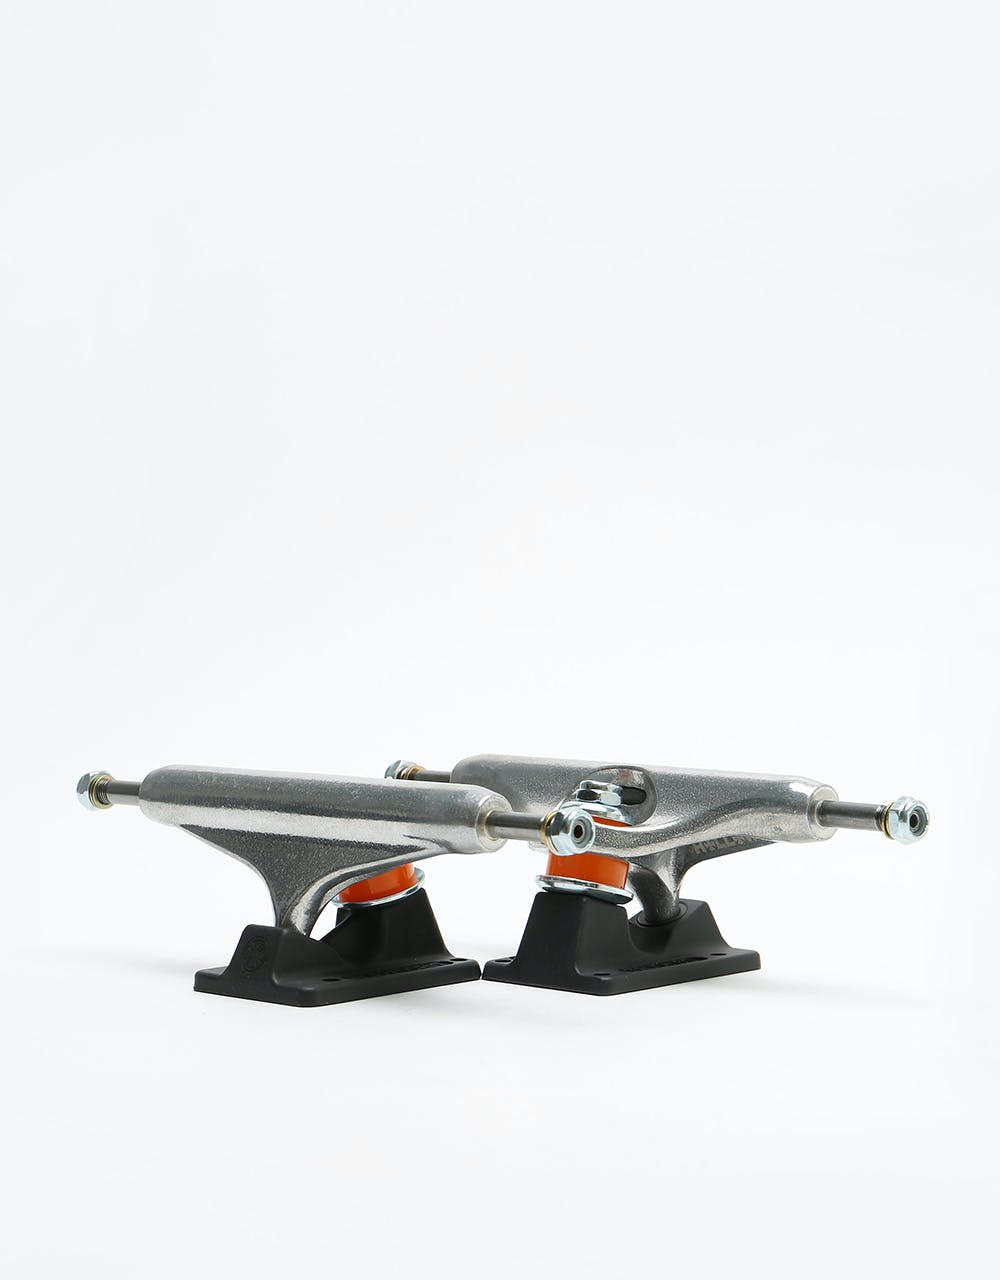 Independent Stage 11 Hollow Forged 149 Standard Skateboard Trucks